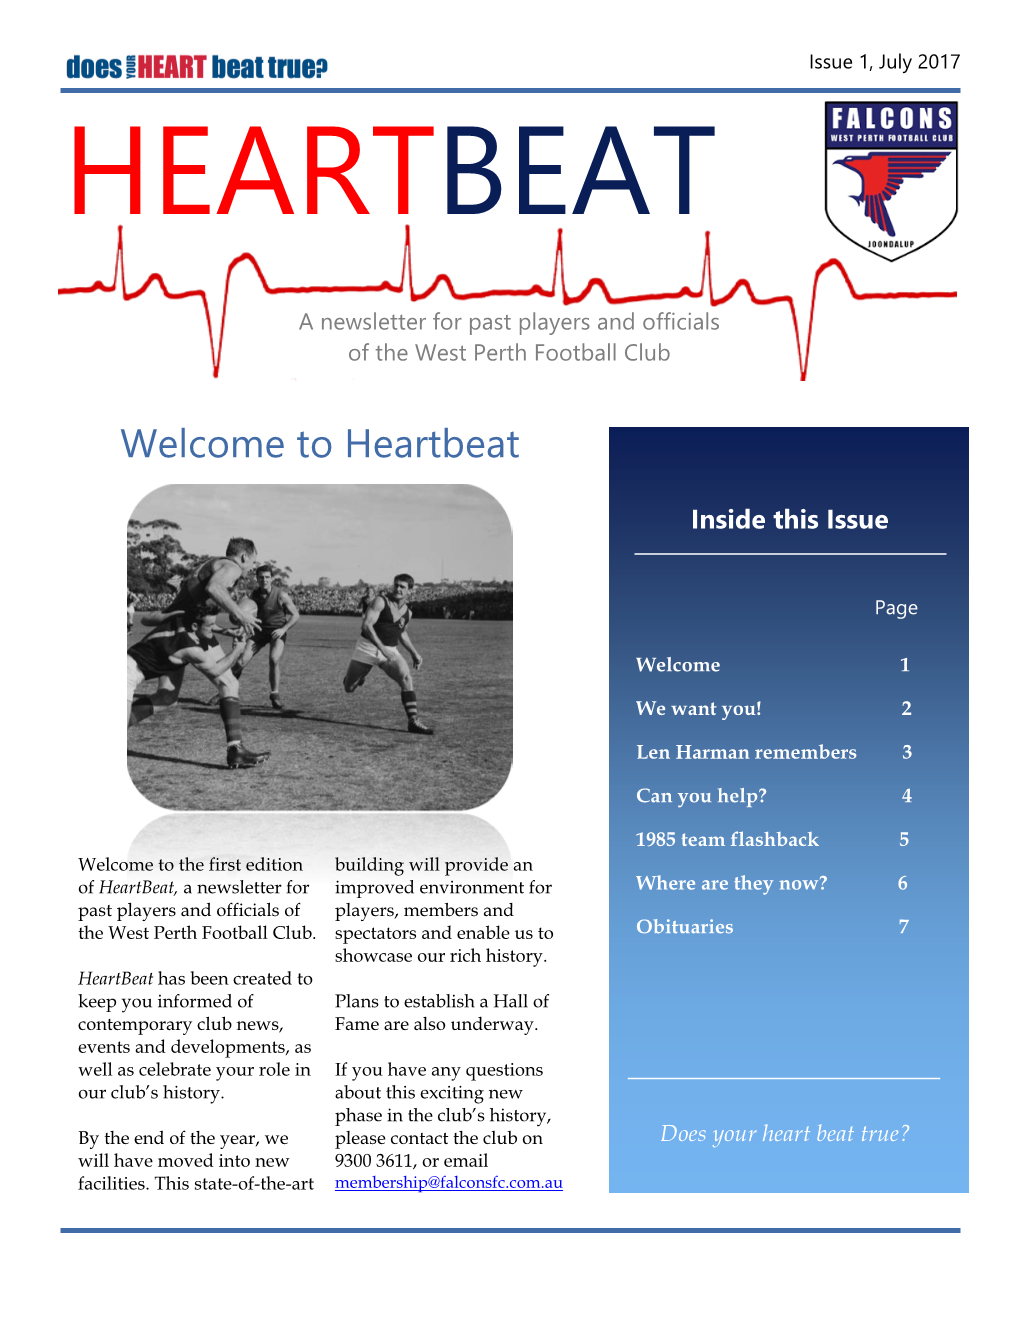 Welcome to Heartbeat